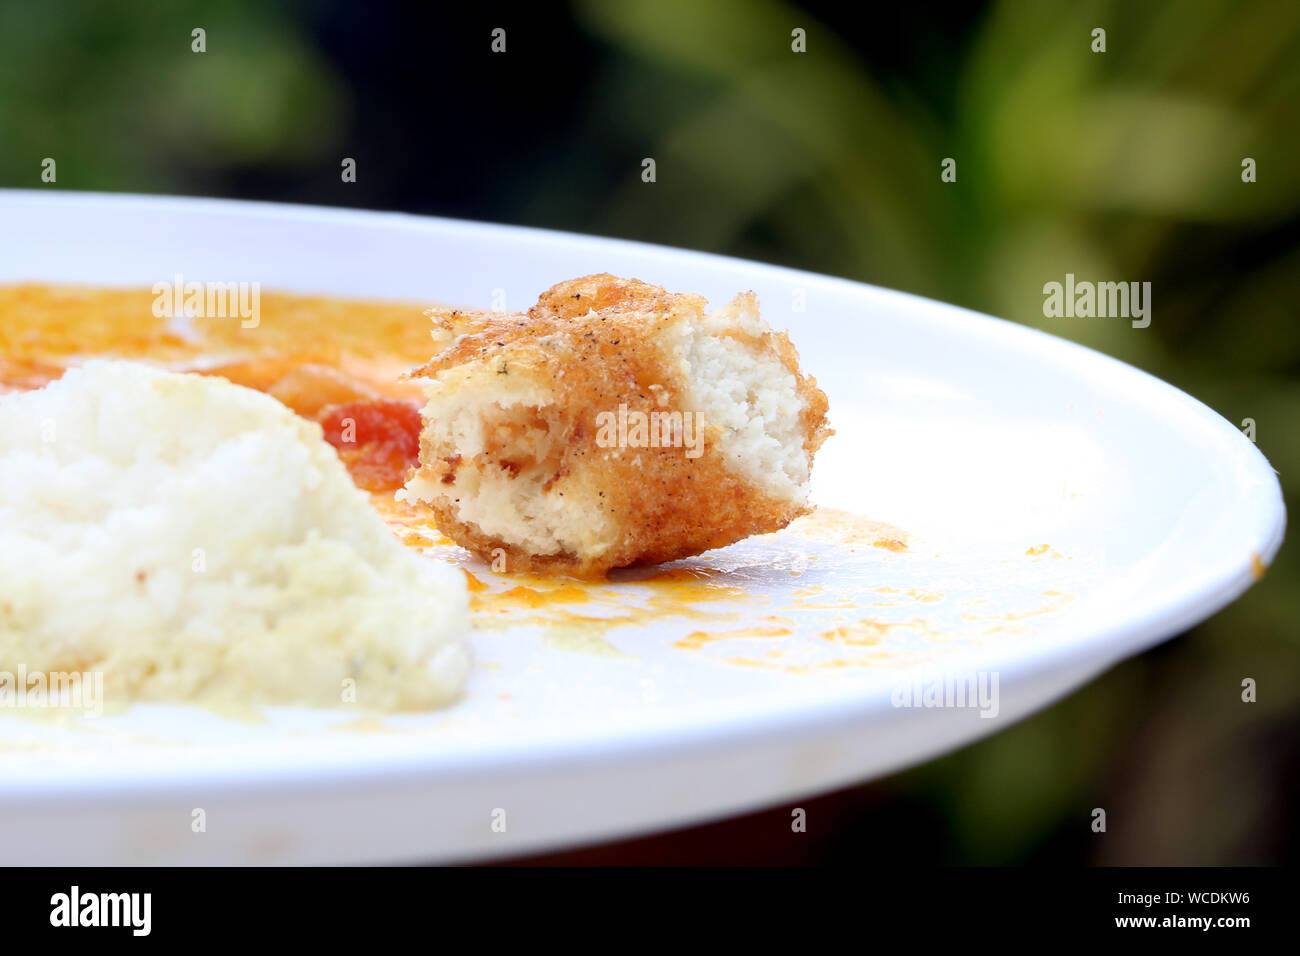 The rest of the Vada was eaten Stock Photo